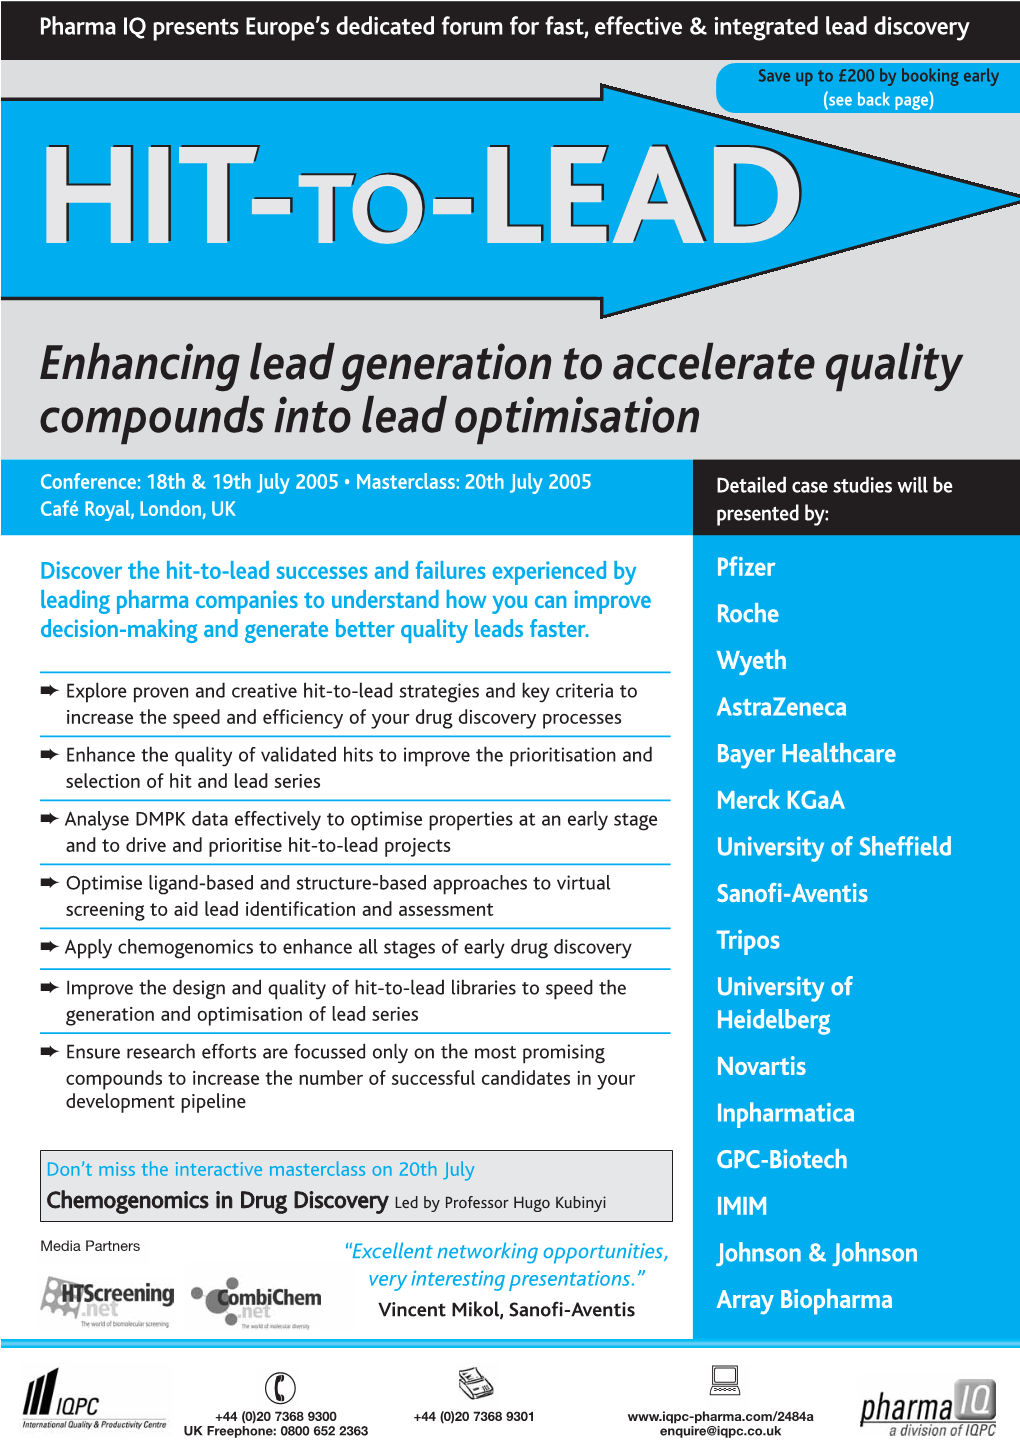 Enhancing Lead Generation to Accelerate Quality Compounds Into Lead Optimisation